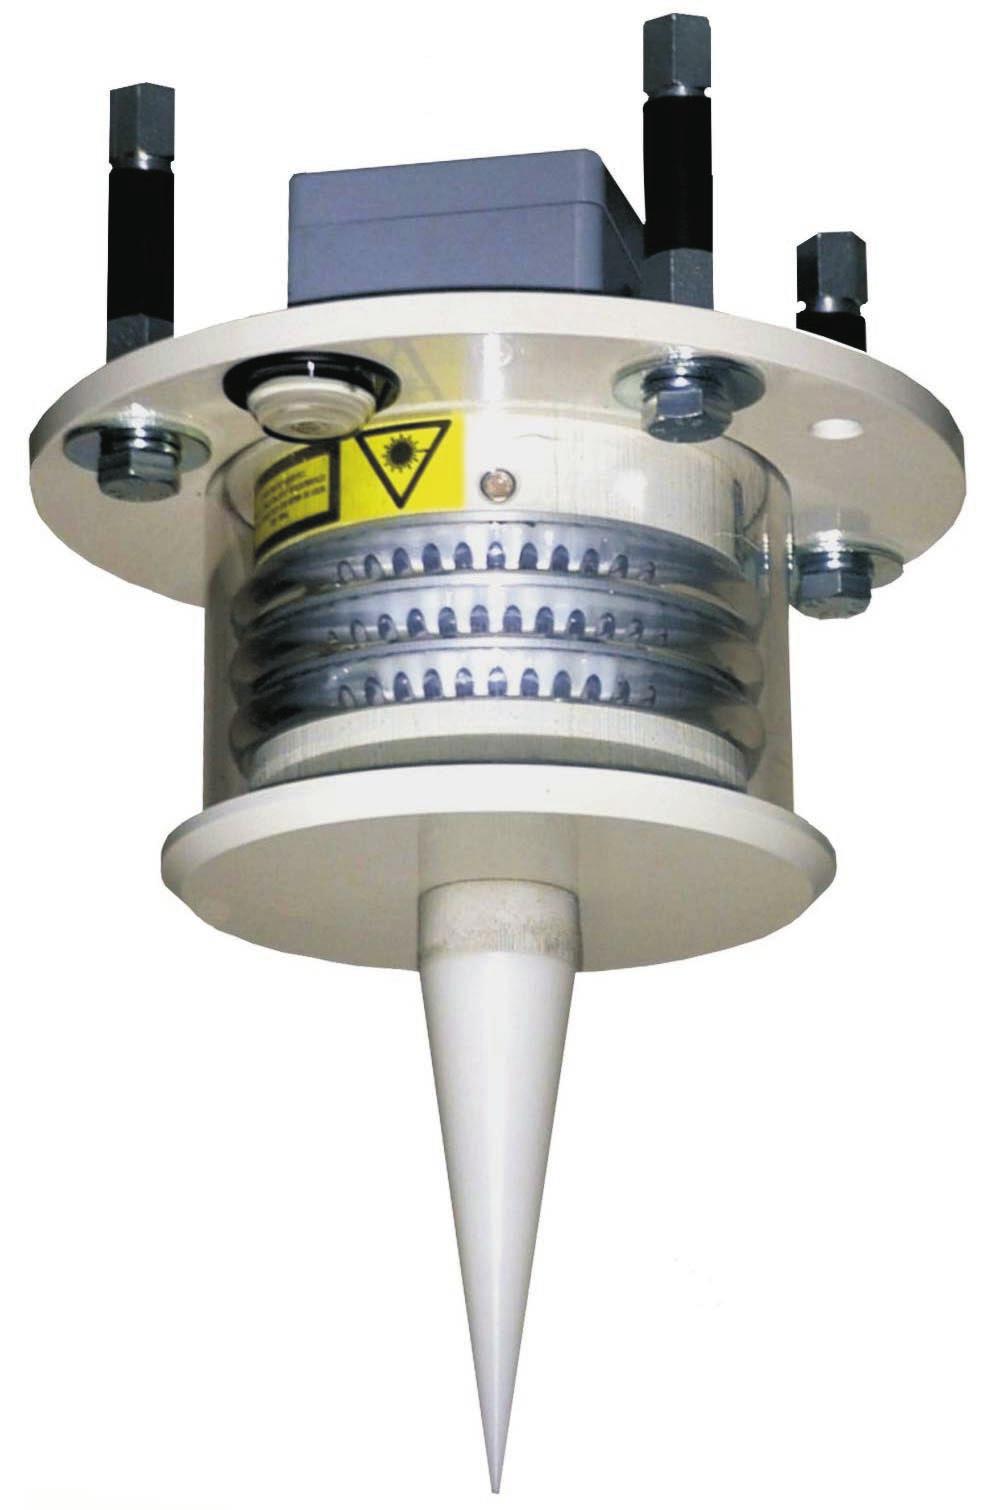 Omnidirectional LED Lights Family E825 The Omnidirectional Lights of the family E825 utilize highly efficient LED technology to provide omnidirectional flashing or steady light beam for use in